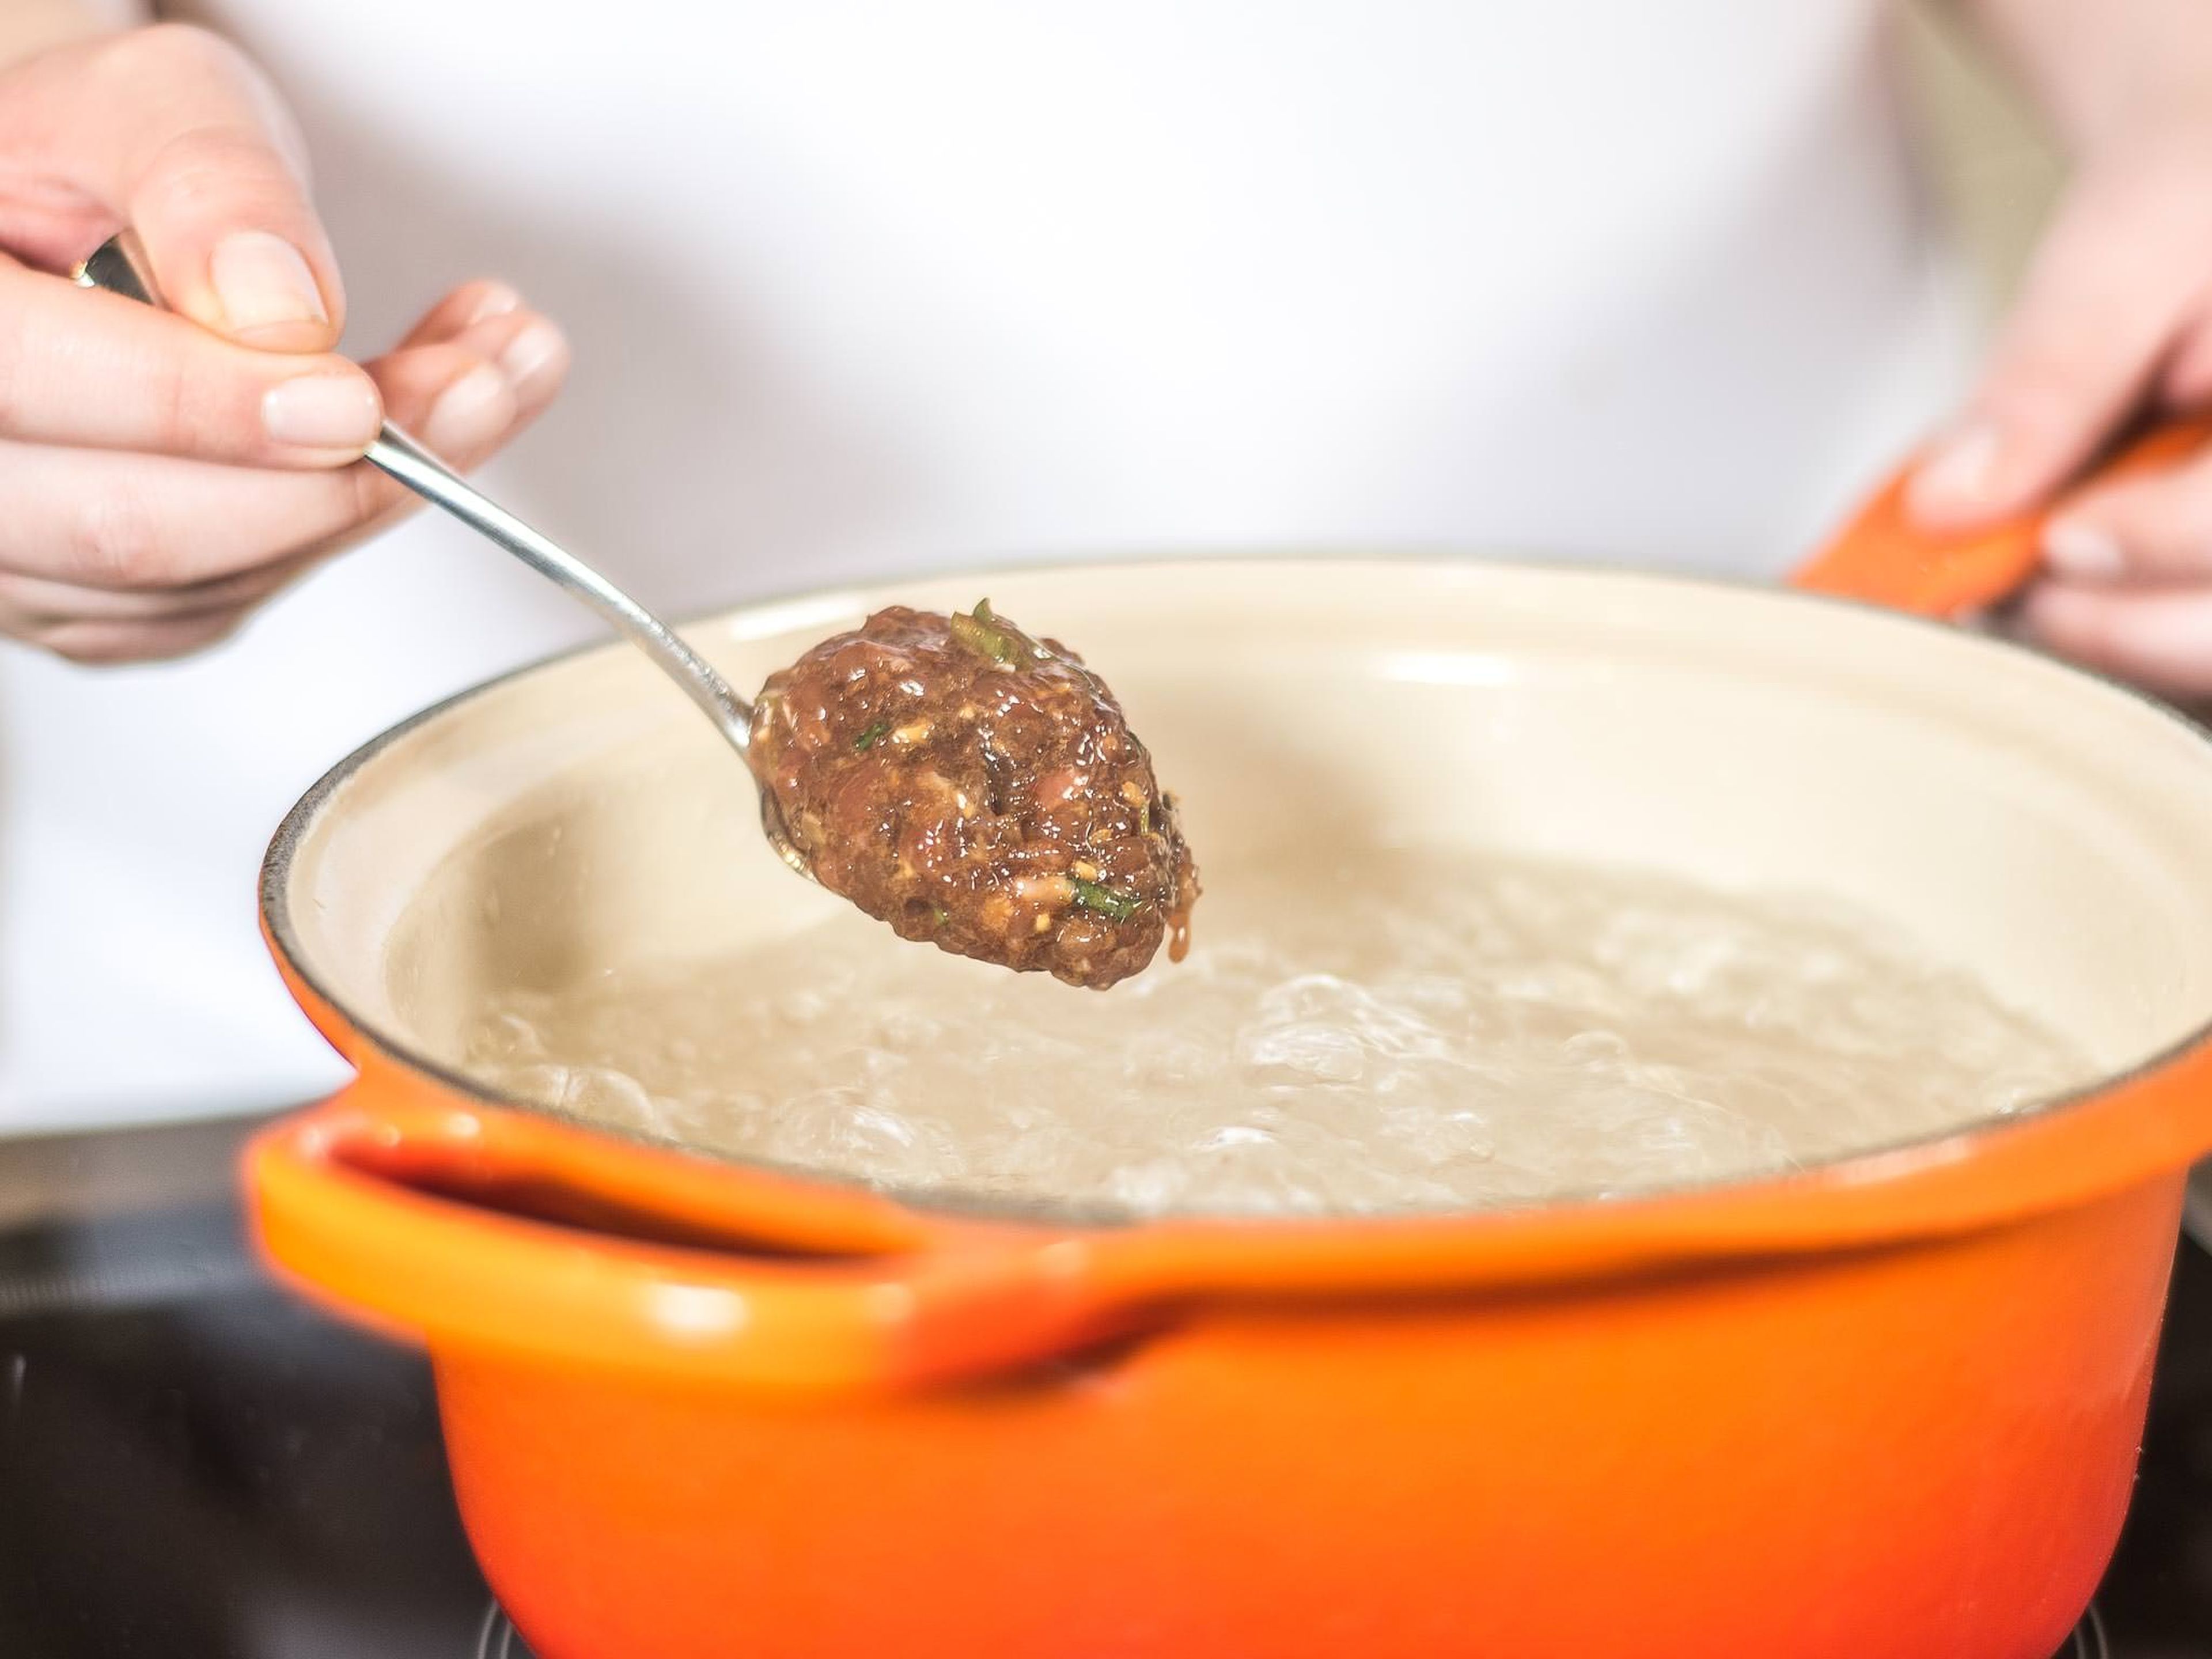 Now, put the meat balls into the boiling water using a spoon.